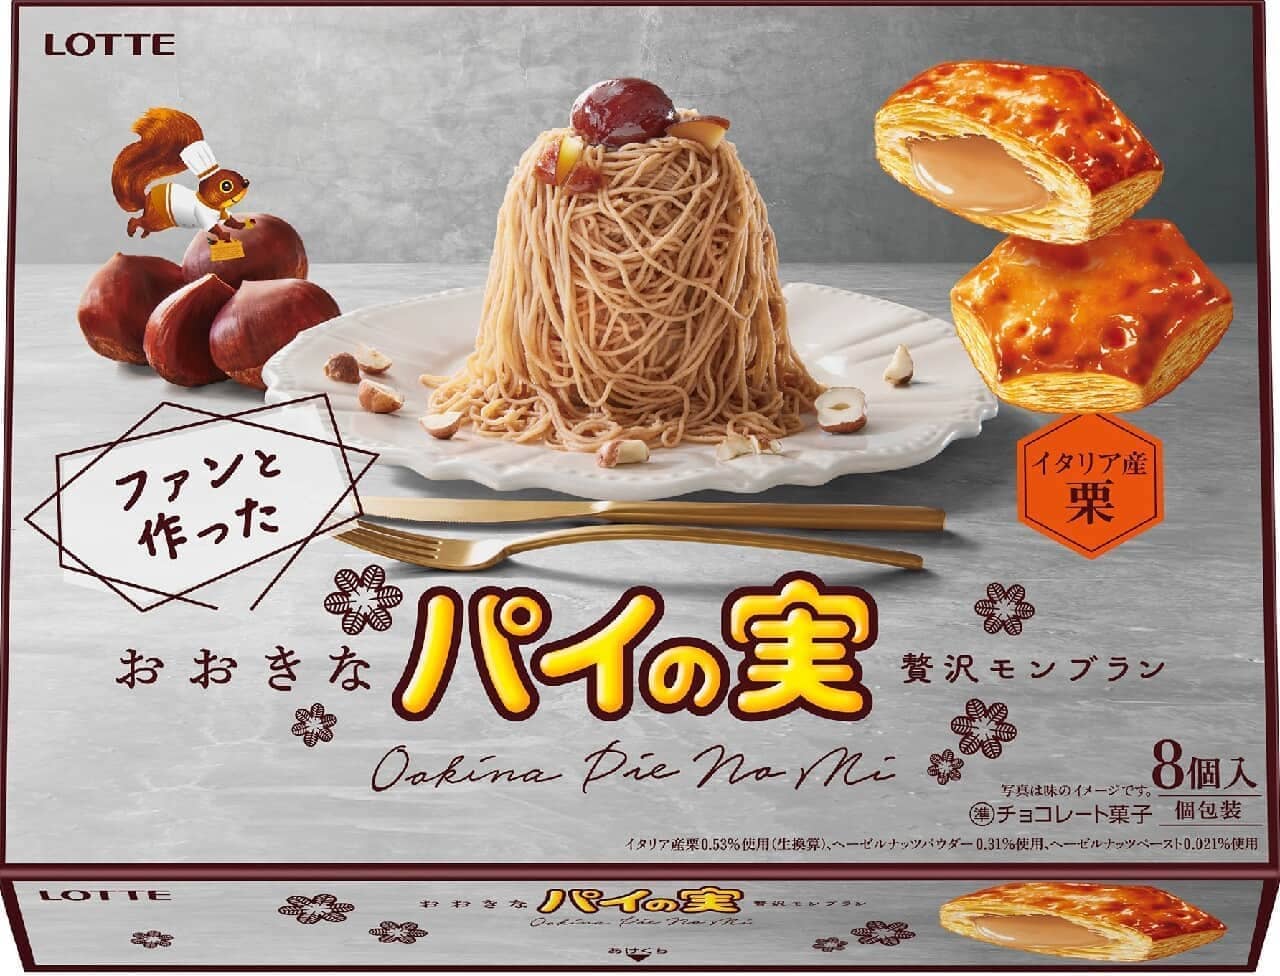 Lotte "Ookina Pie no Mi [Luxury Mont Blanc made with fans]".